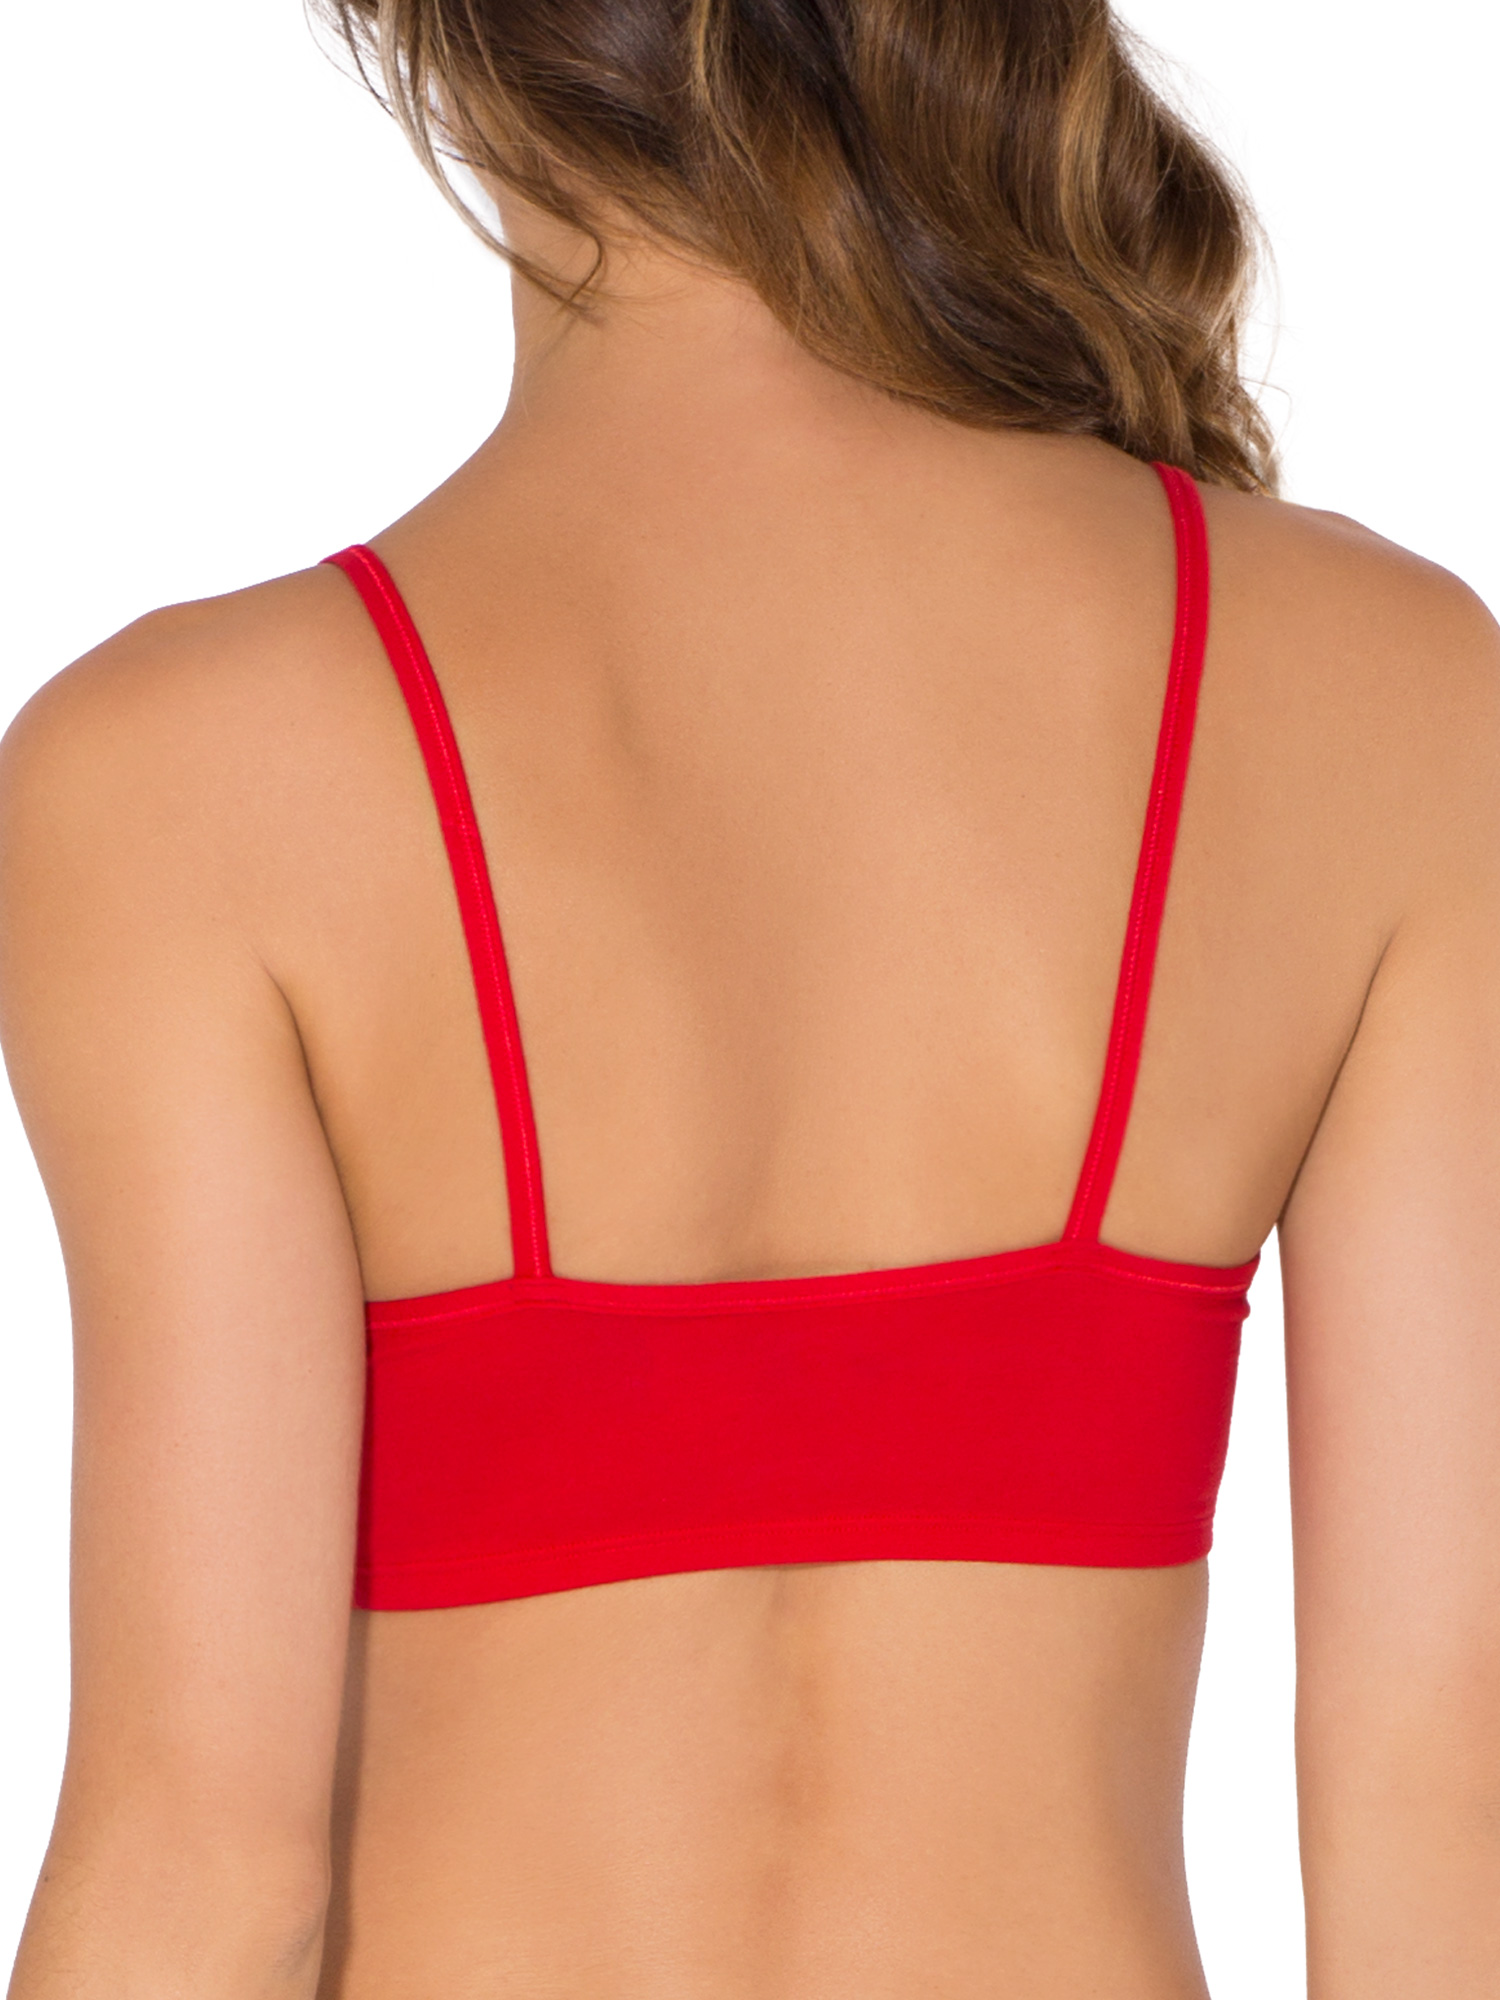 Fruit of the Loom Women's Spaghetti Strap Cotton Sports Bra, 3-Pack, Style-9036 - image 3 of 9